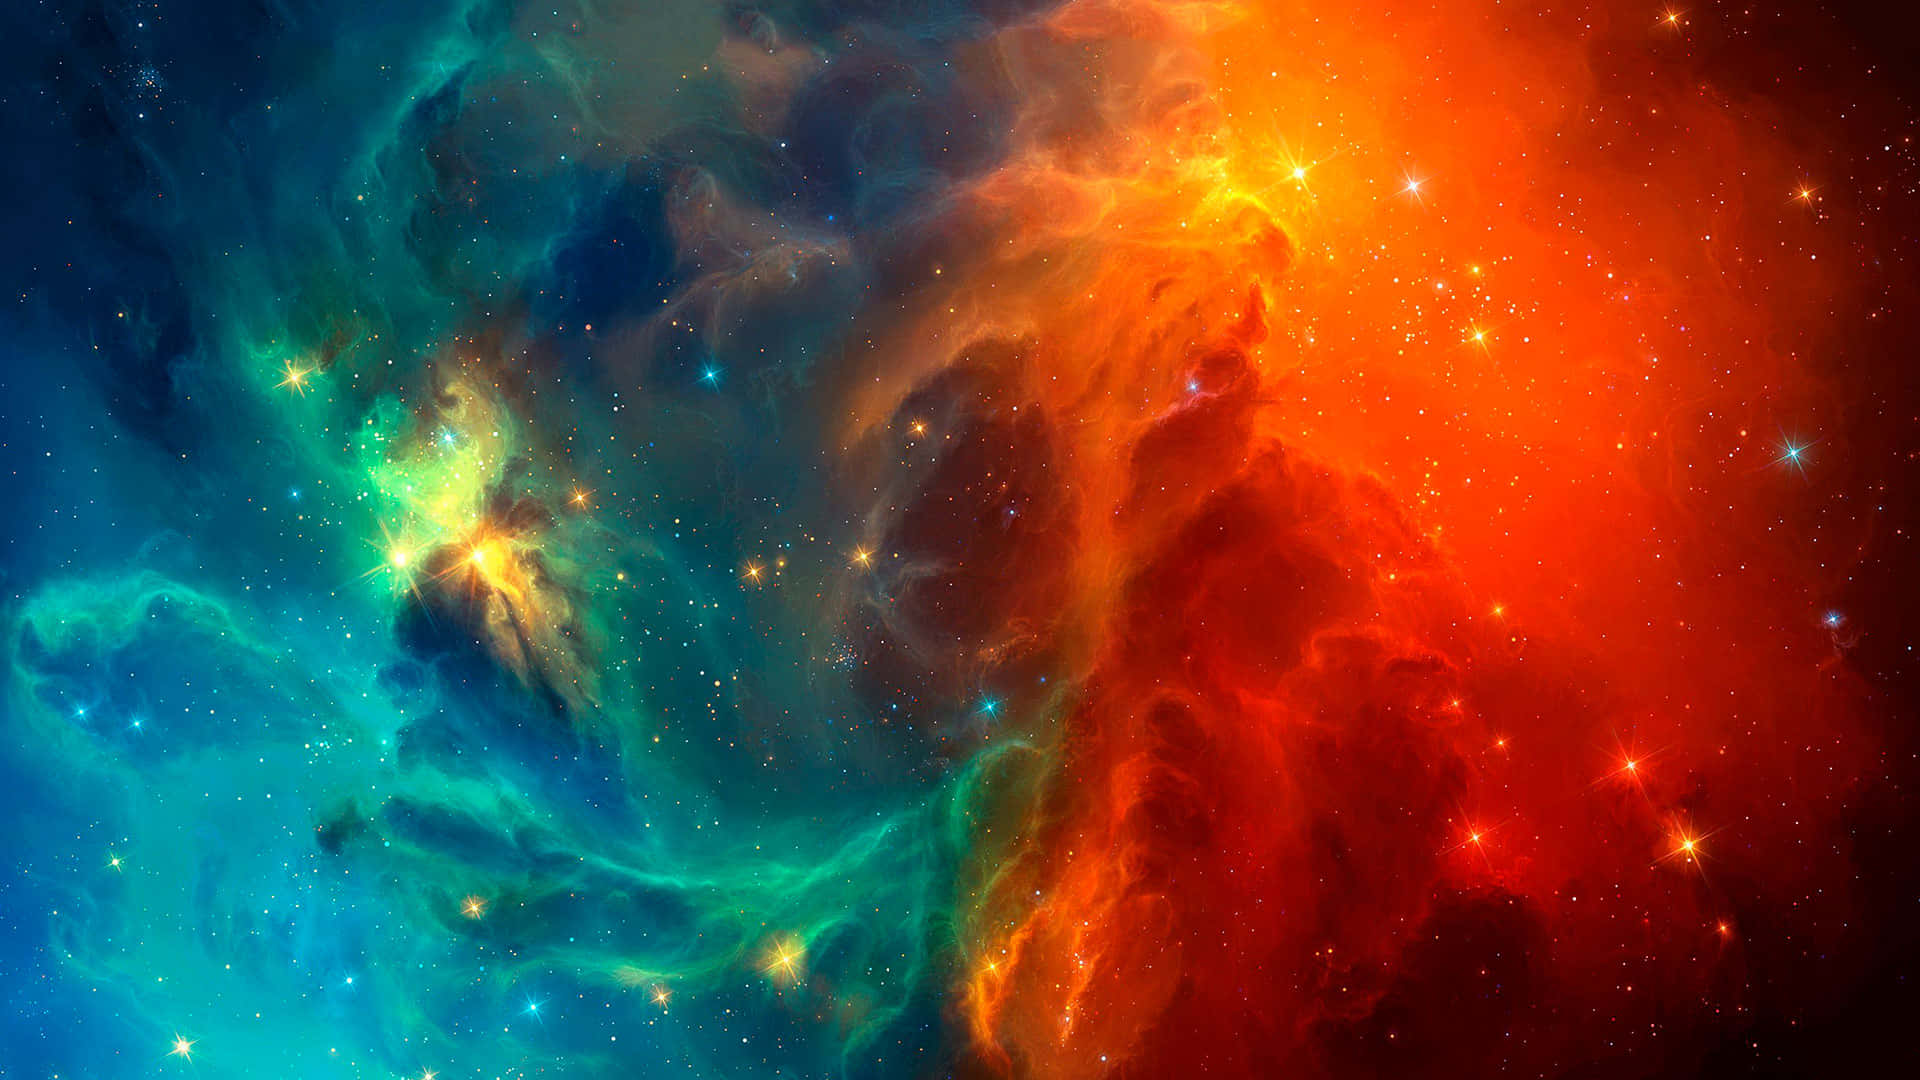 Captivating Universe: Vibrant Nebula in Deep Space